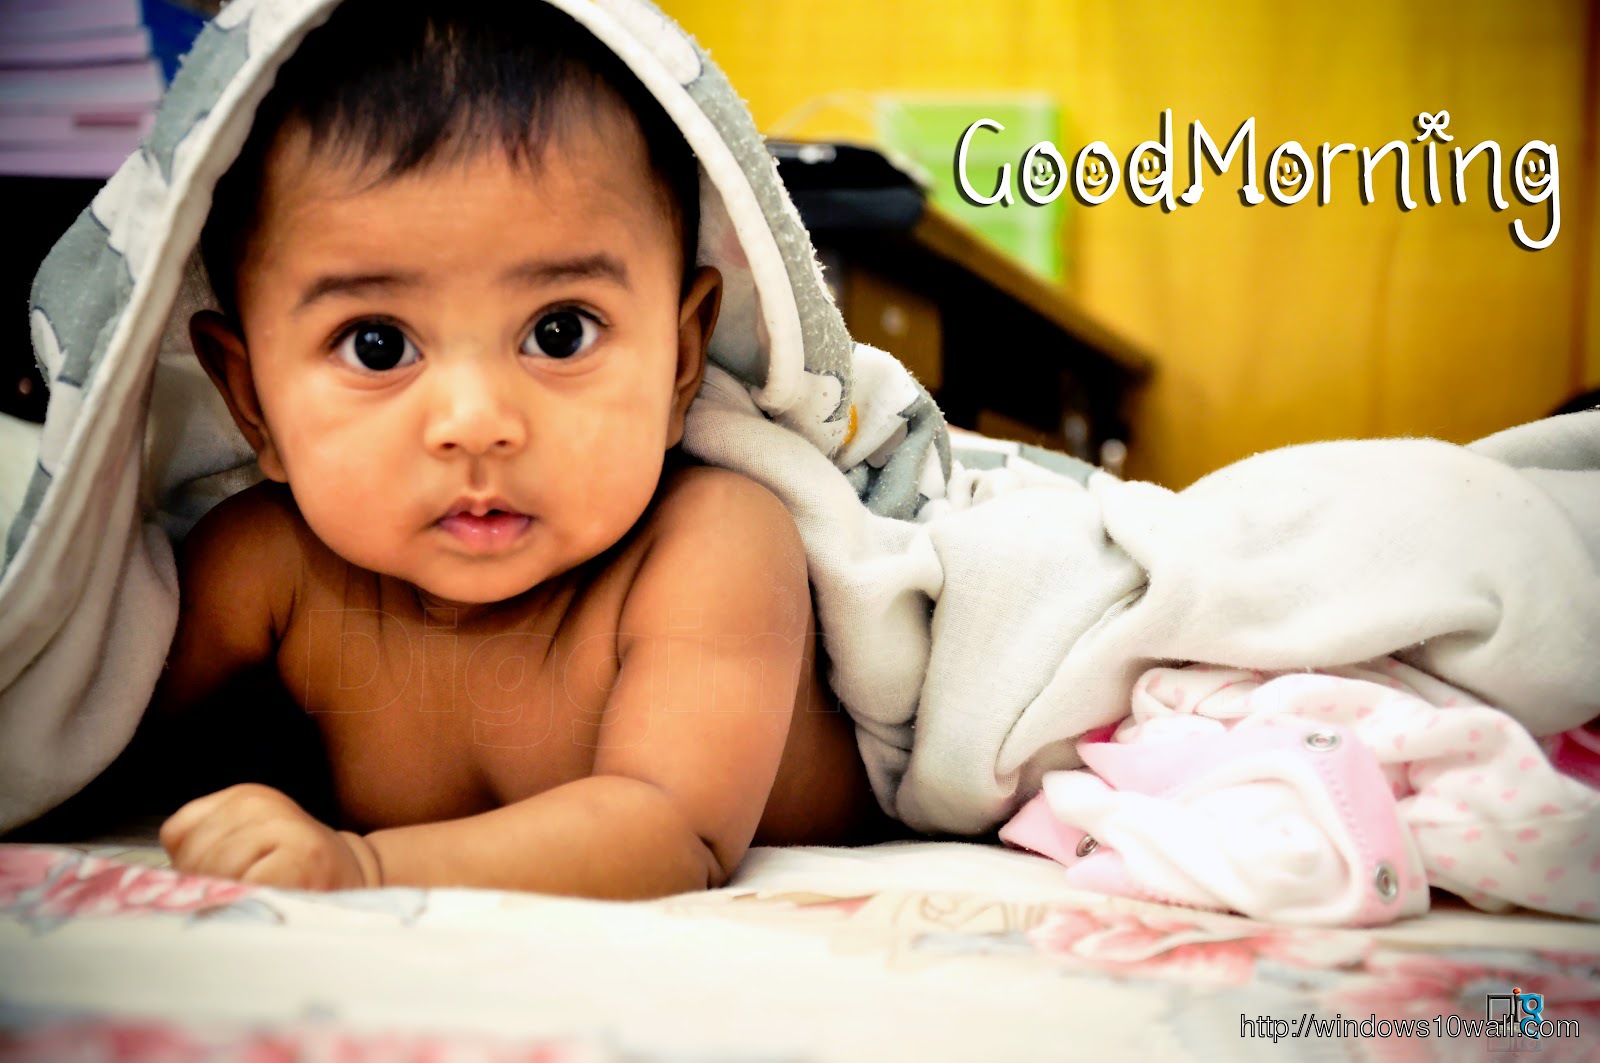 sweet baby good morning images free download